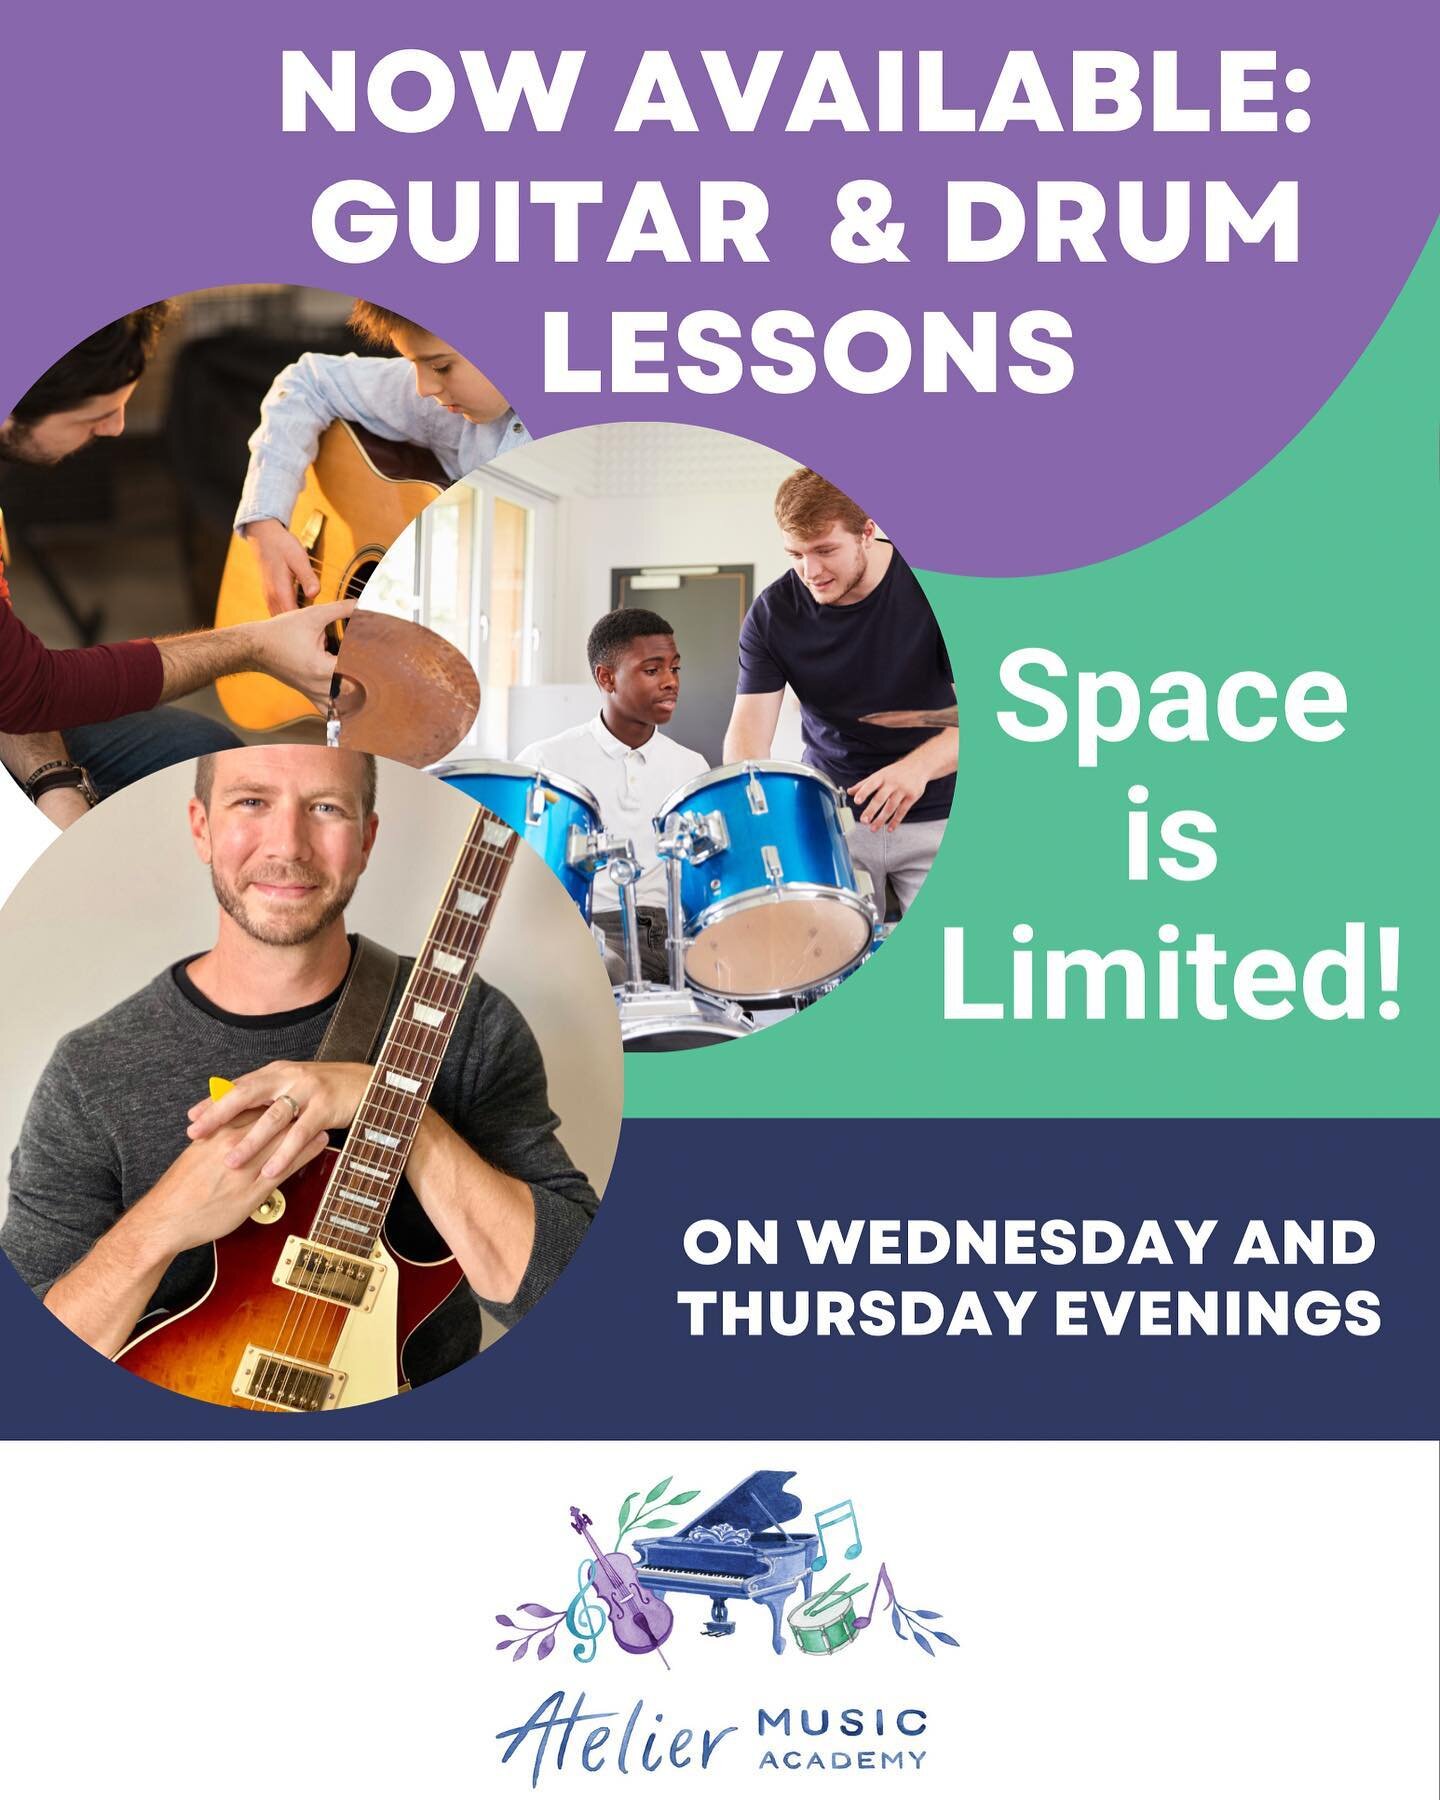 Guitar and drum lessons available on Wednesday and Thursday evenings with Kyle. Register today to reserve your spot.